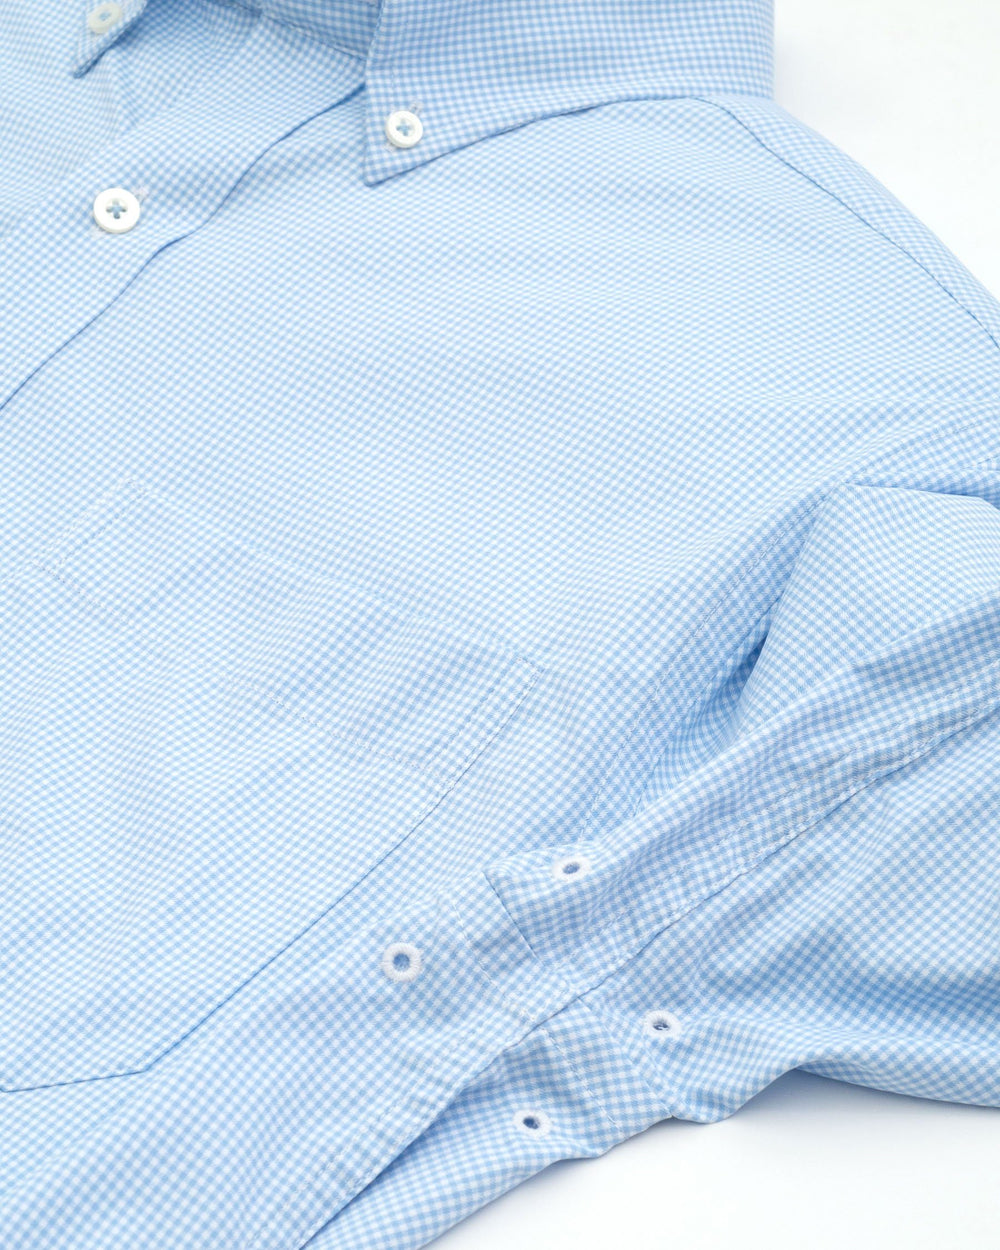 Arm vents of the Men's Light Blue UNC Tar Heels Gingham Button Down Shirt by Southern Tide - Tide Blue